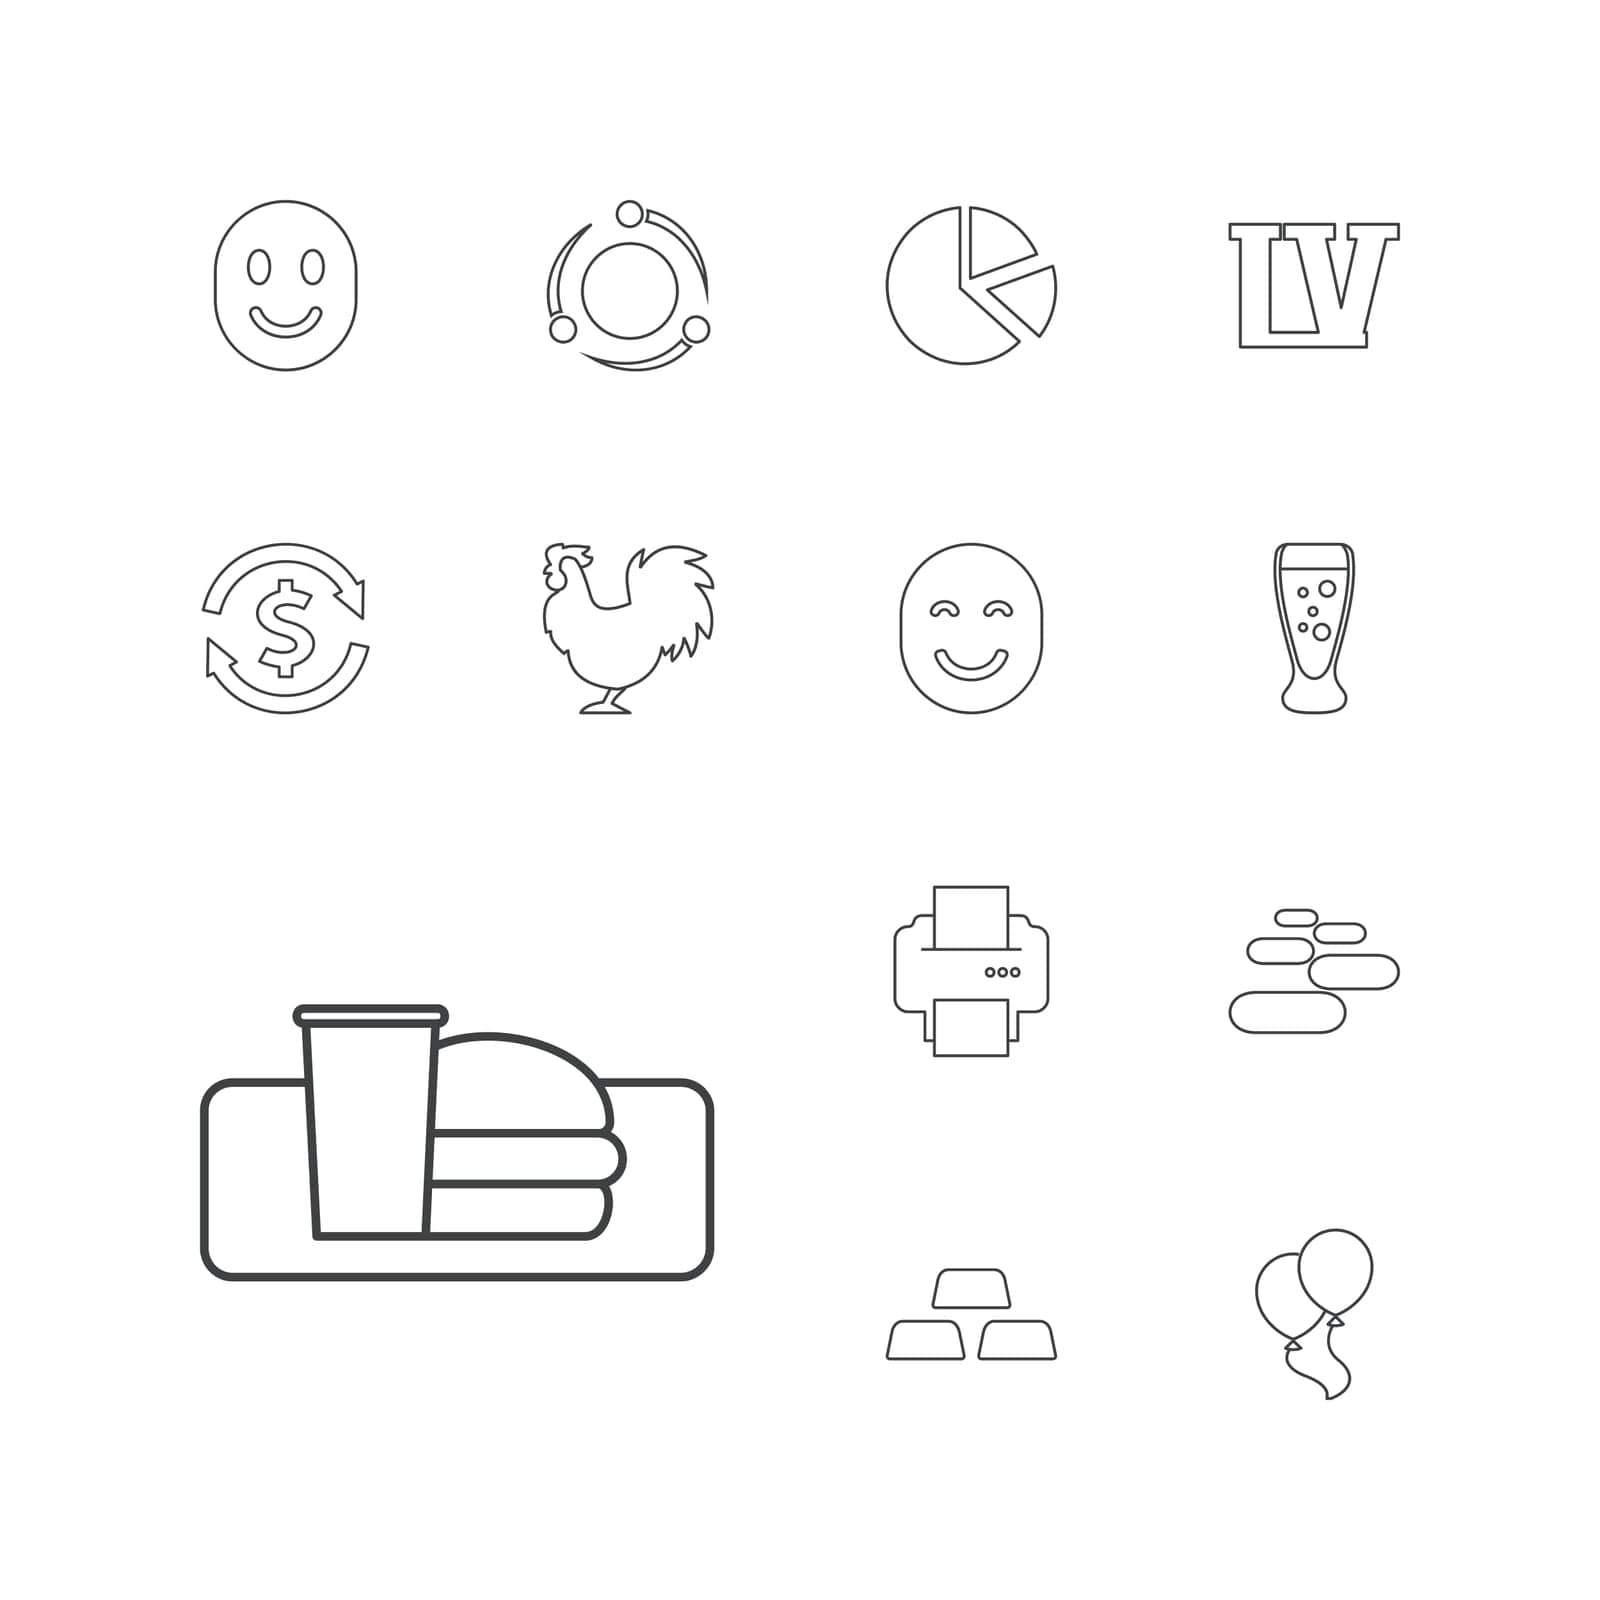 symbol,chicken,happy,concept,icon,sign,isolated,pie,gold,character,white,burger,and,design,vector,graphic,element,smiley,glass,balloon,smiling,emot,art,set,shape,business,vegas,spa,printer,black,milk,investment,abstract,soda,stone,money,background,exchange,illustration,atom,chart,fun,object